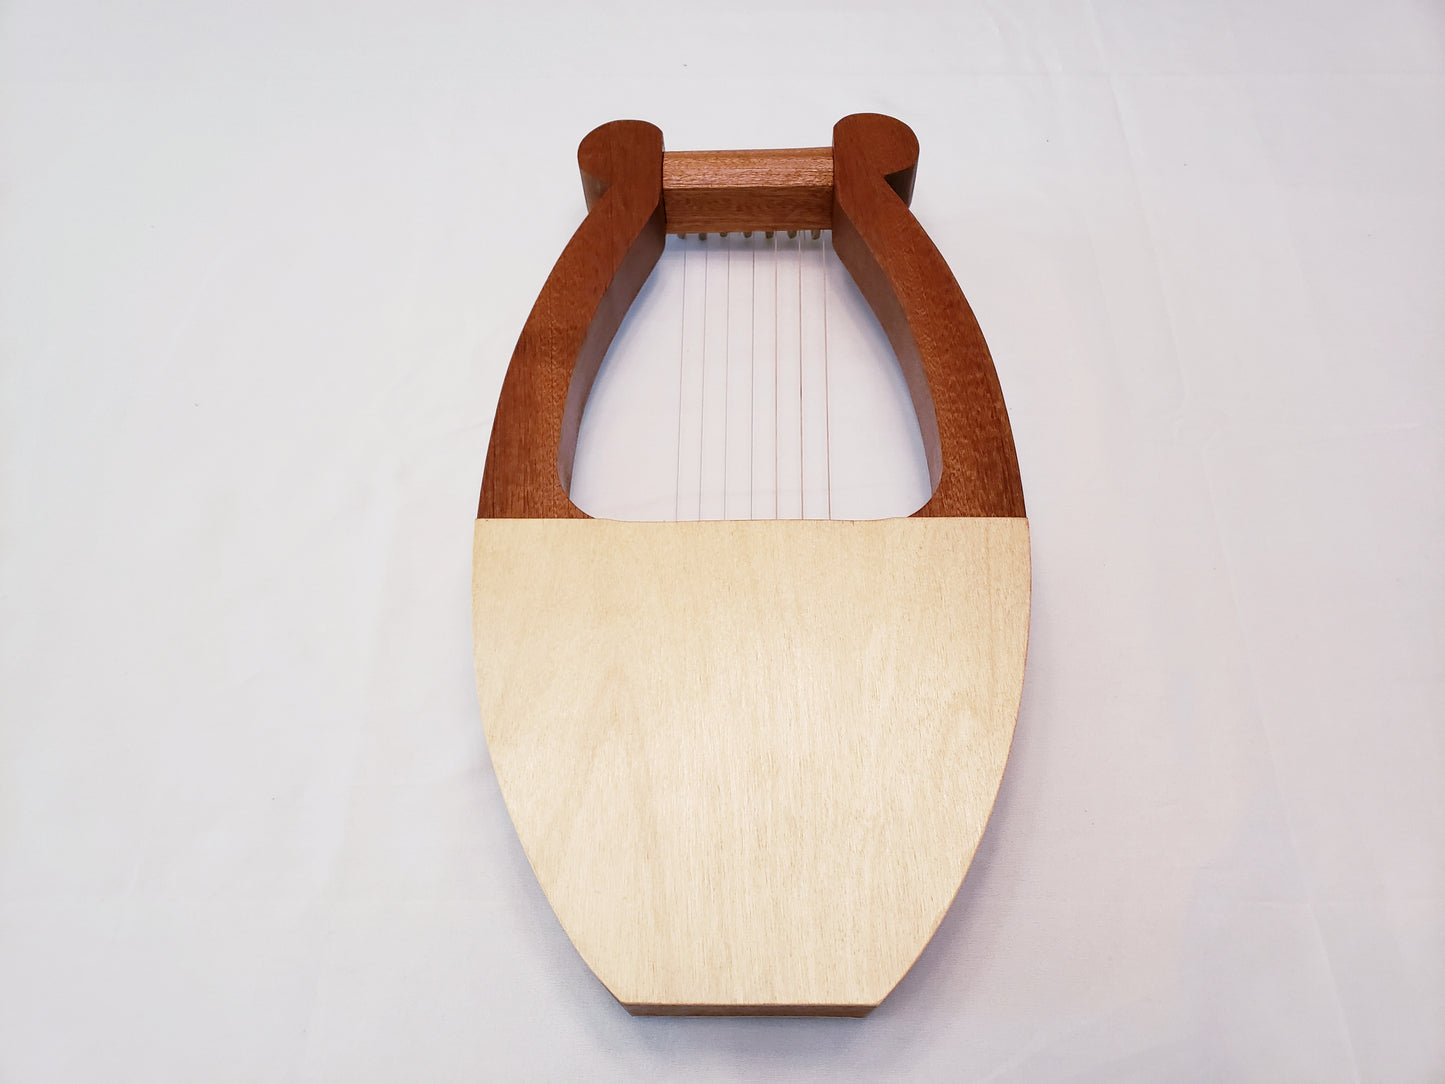 lyre with 7 strings: back view